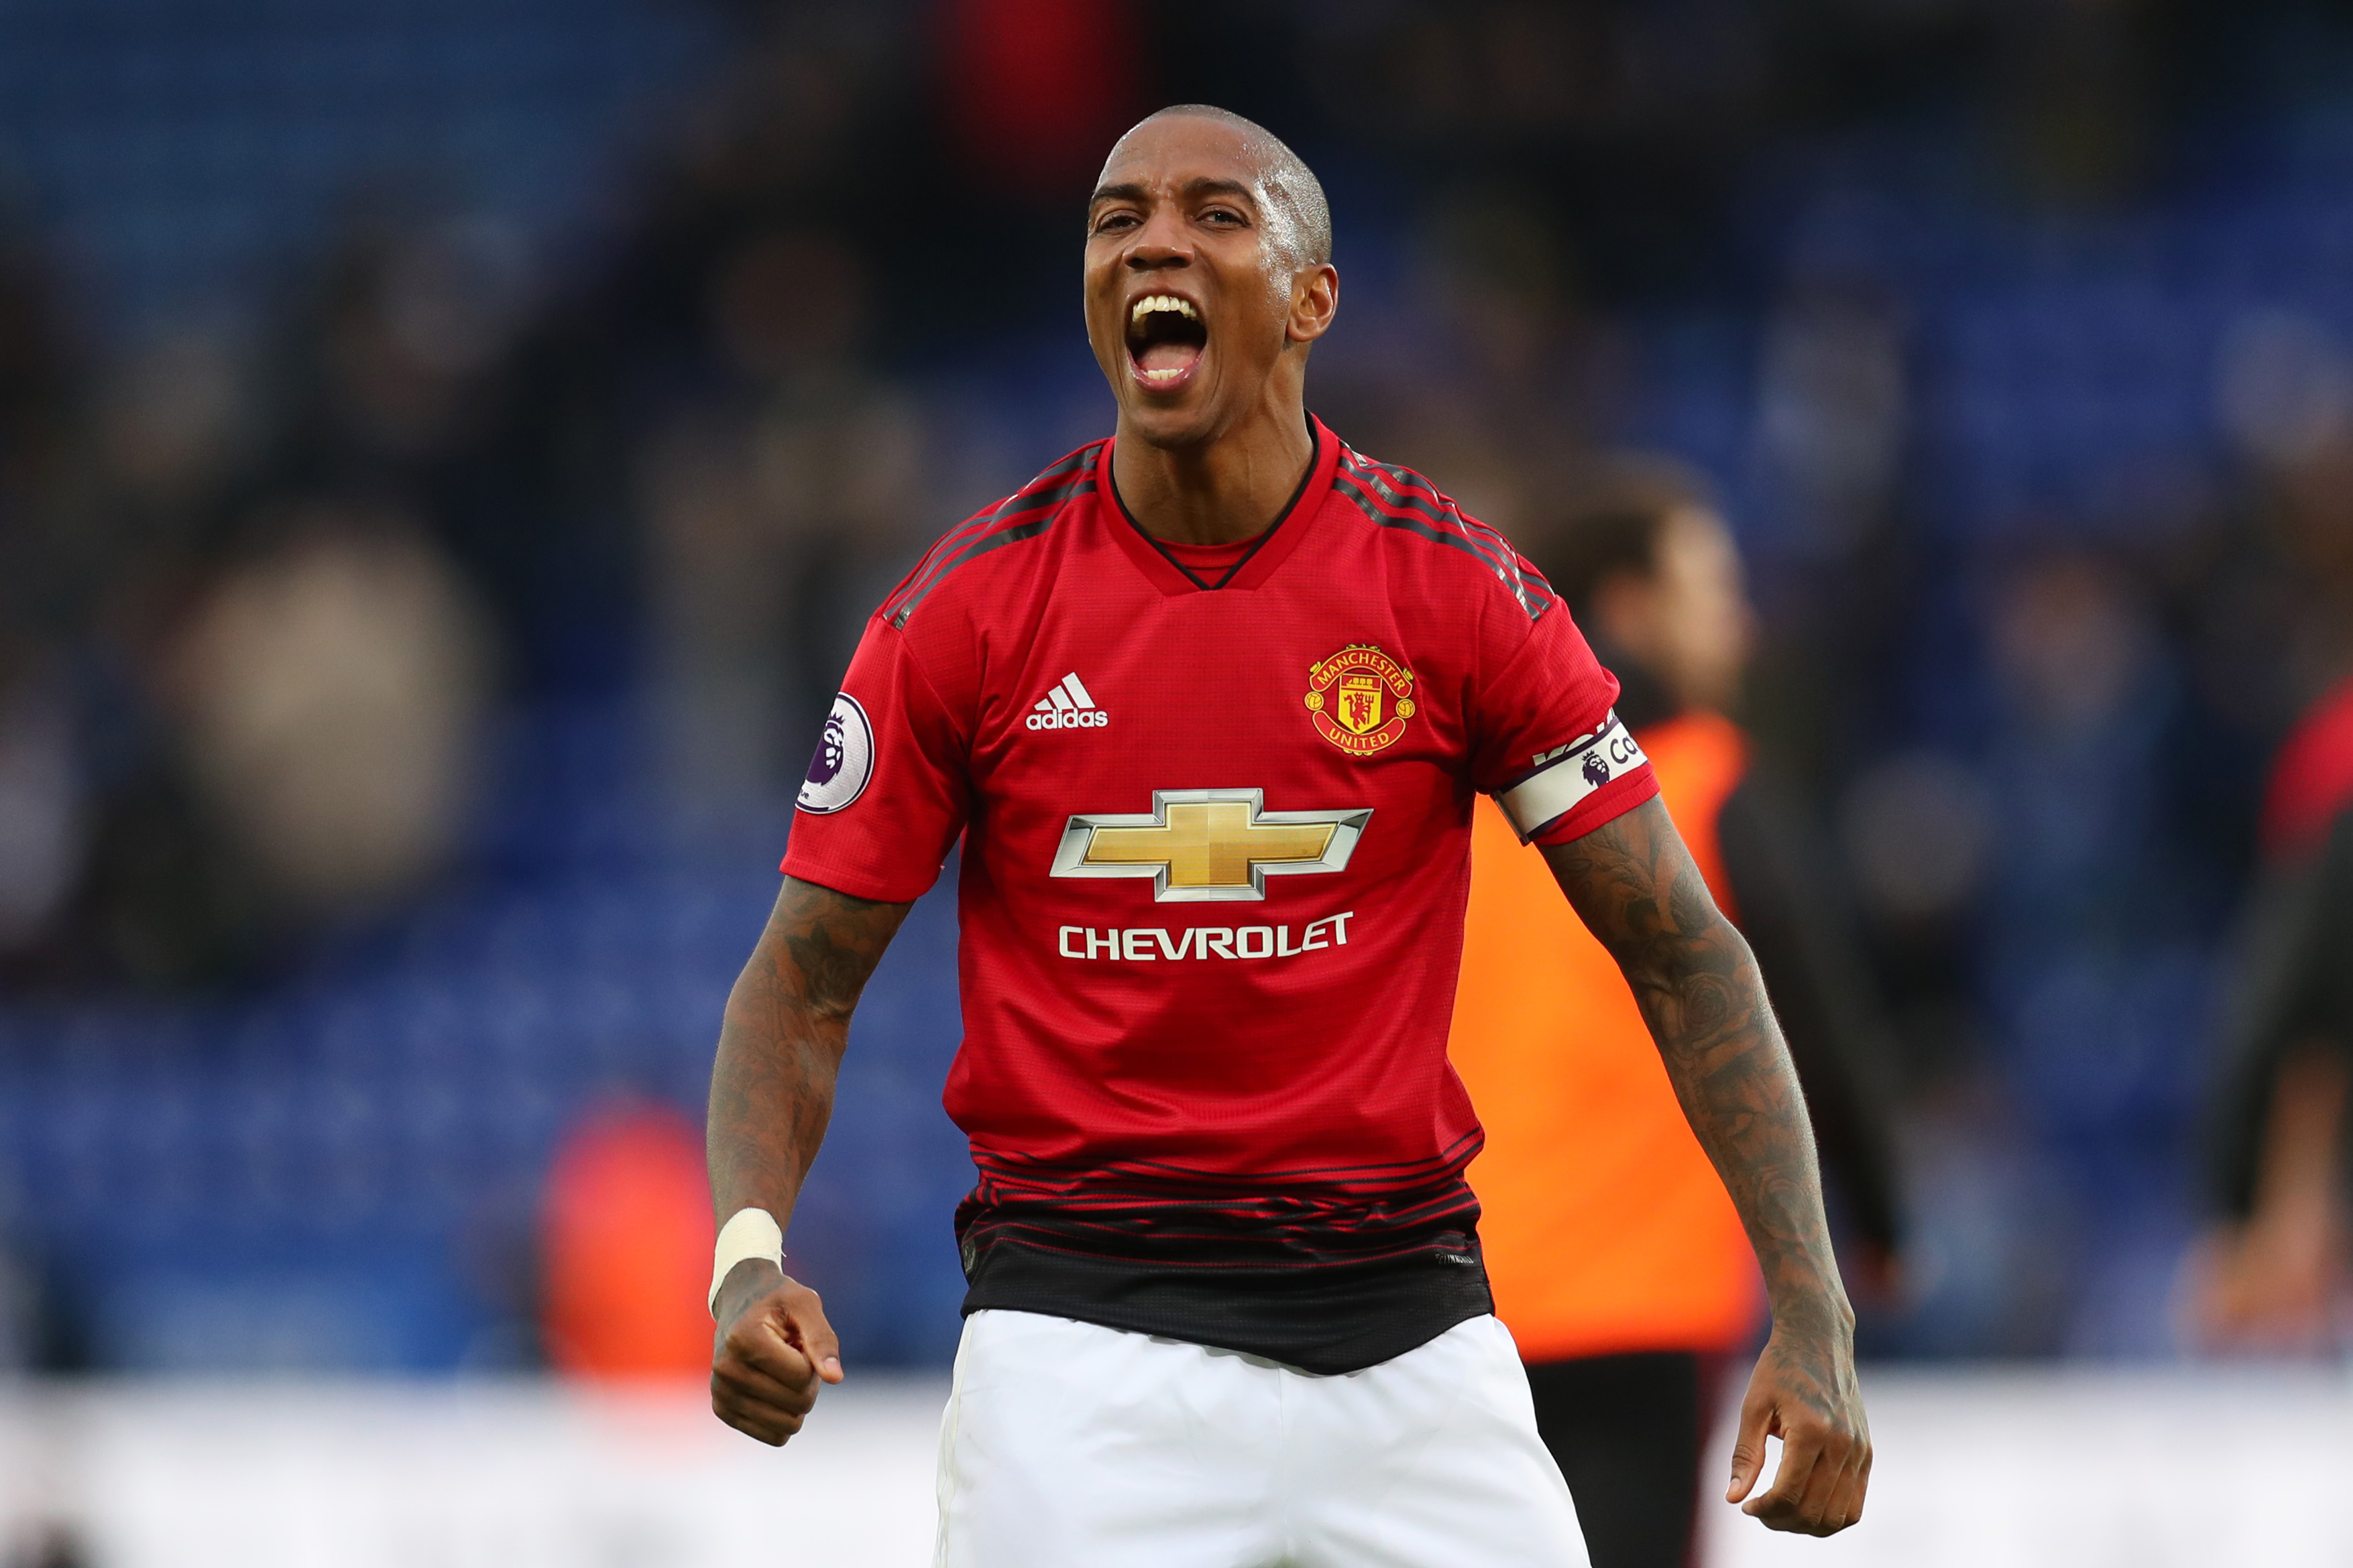 LEICESTER, ENGLAND - FEBRUARY 03: Ashley Young of Manchester United celebrates victory following the Premier League match between Leicester City and Manchester United at The King Power Stadium on February 3, 2019 in Leicester, United Kingdom.  (Photo by Catherine Ivill/Getty Images)